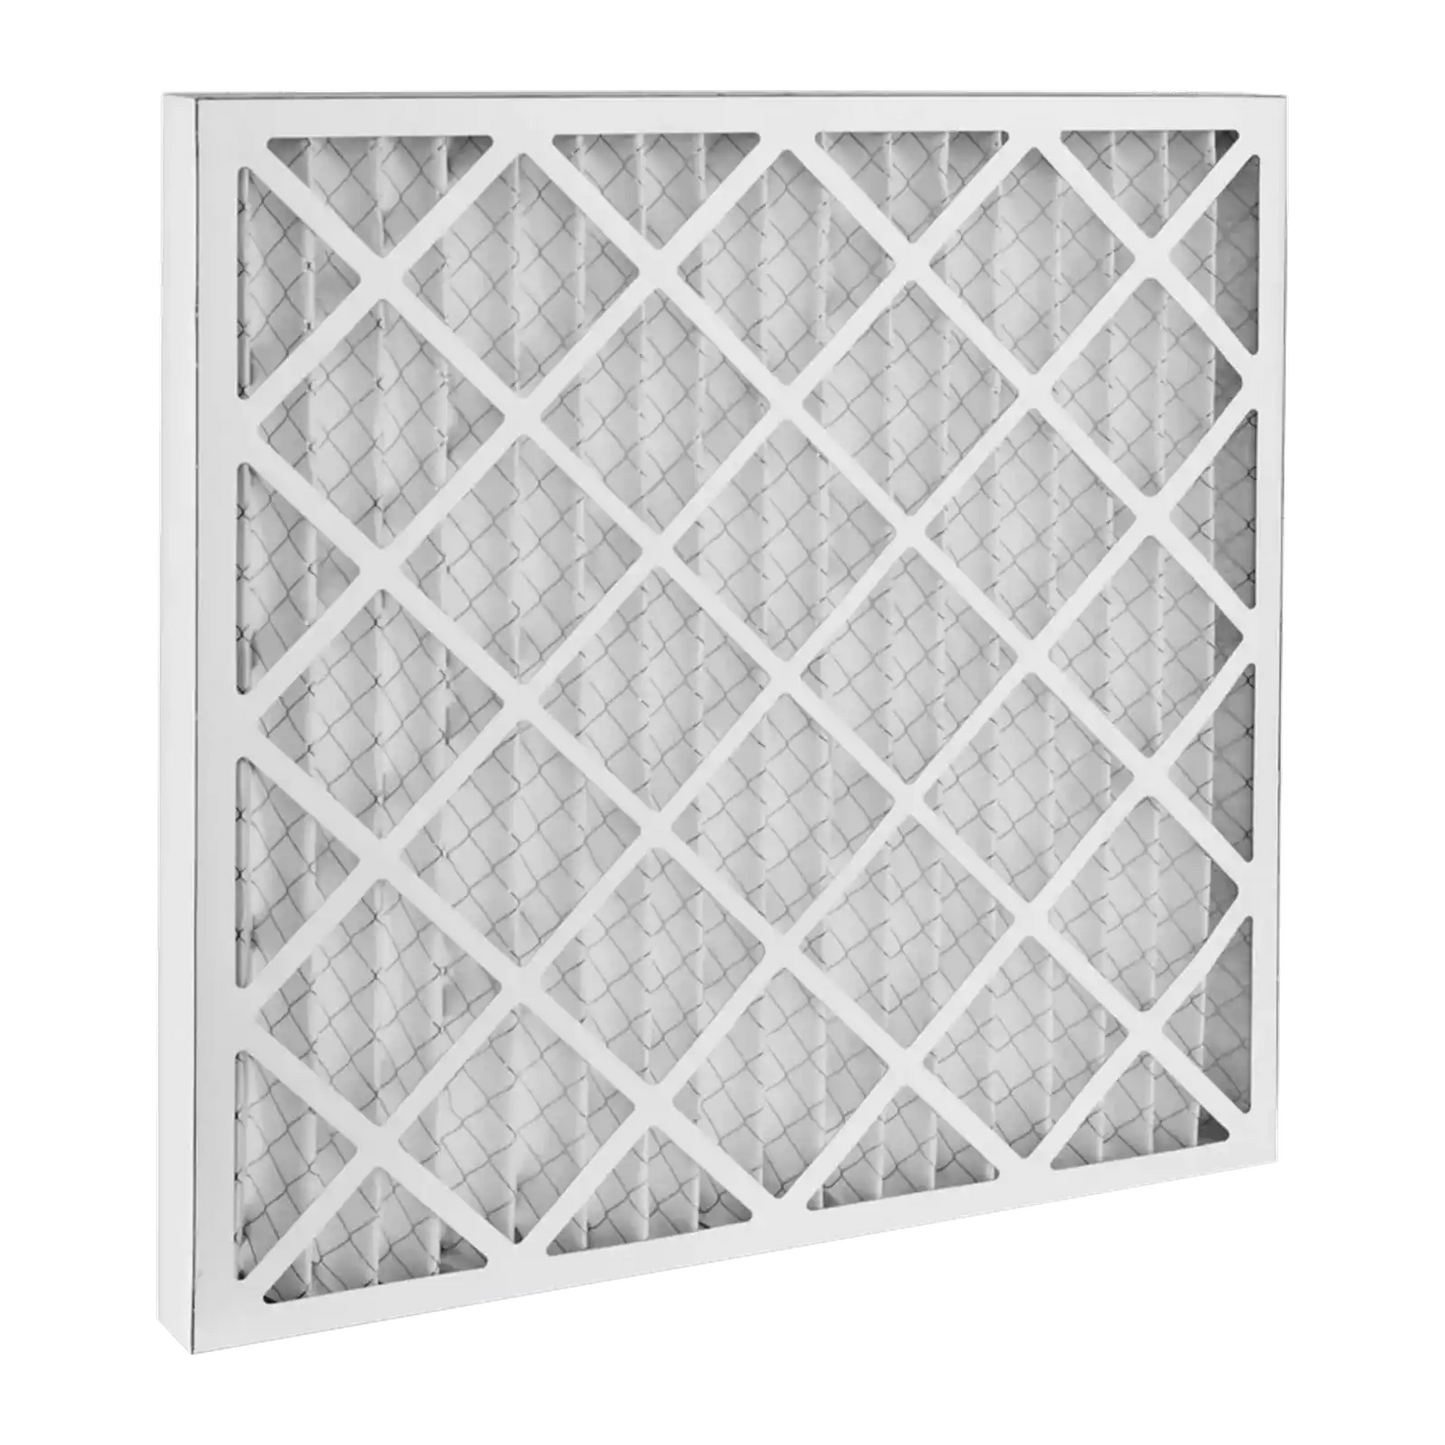 Dafco 12x24x1 Furnace AC Filter - Case of 12